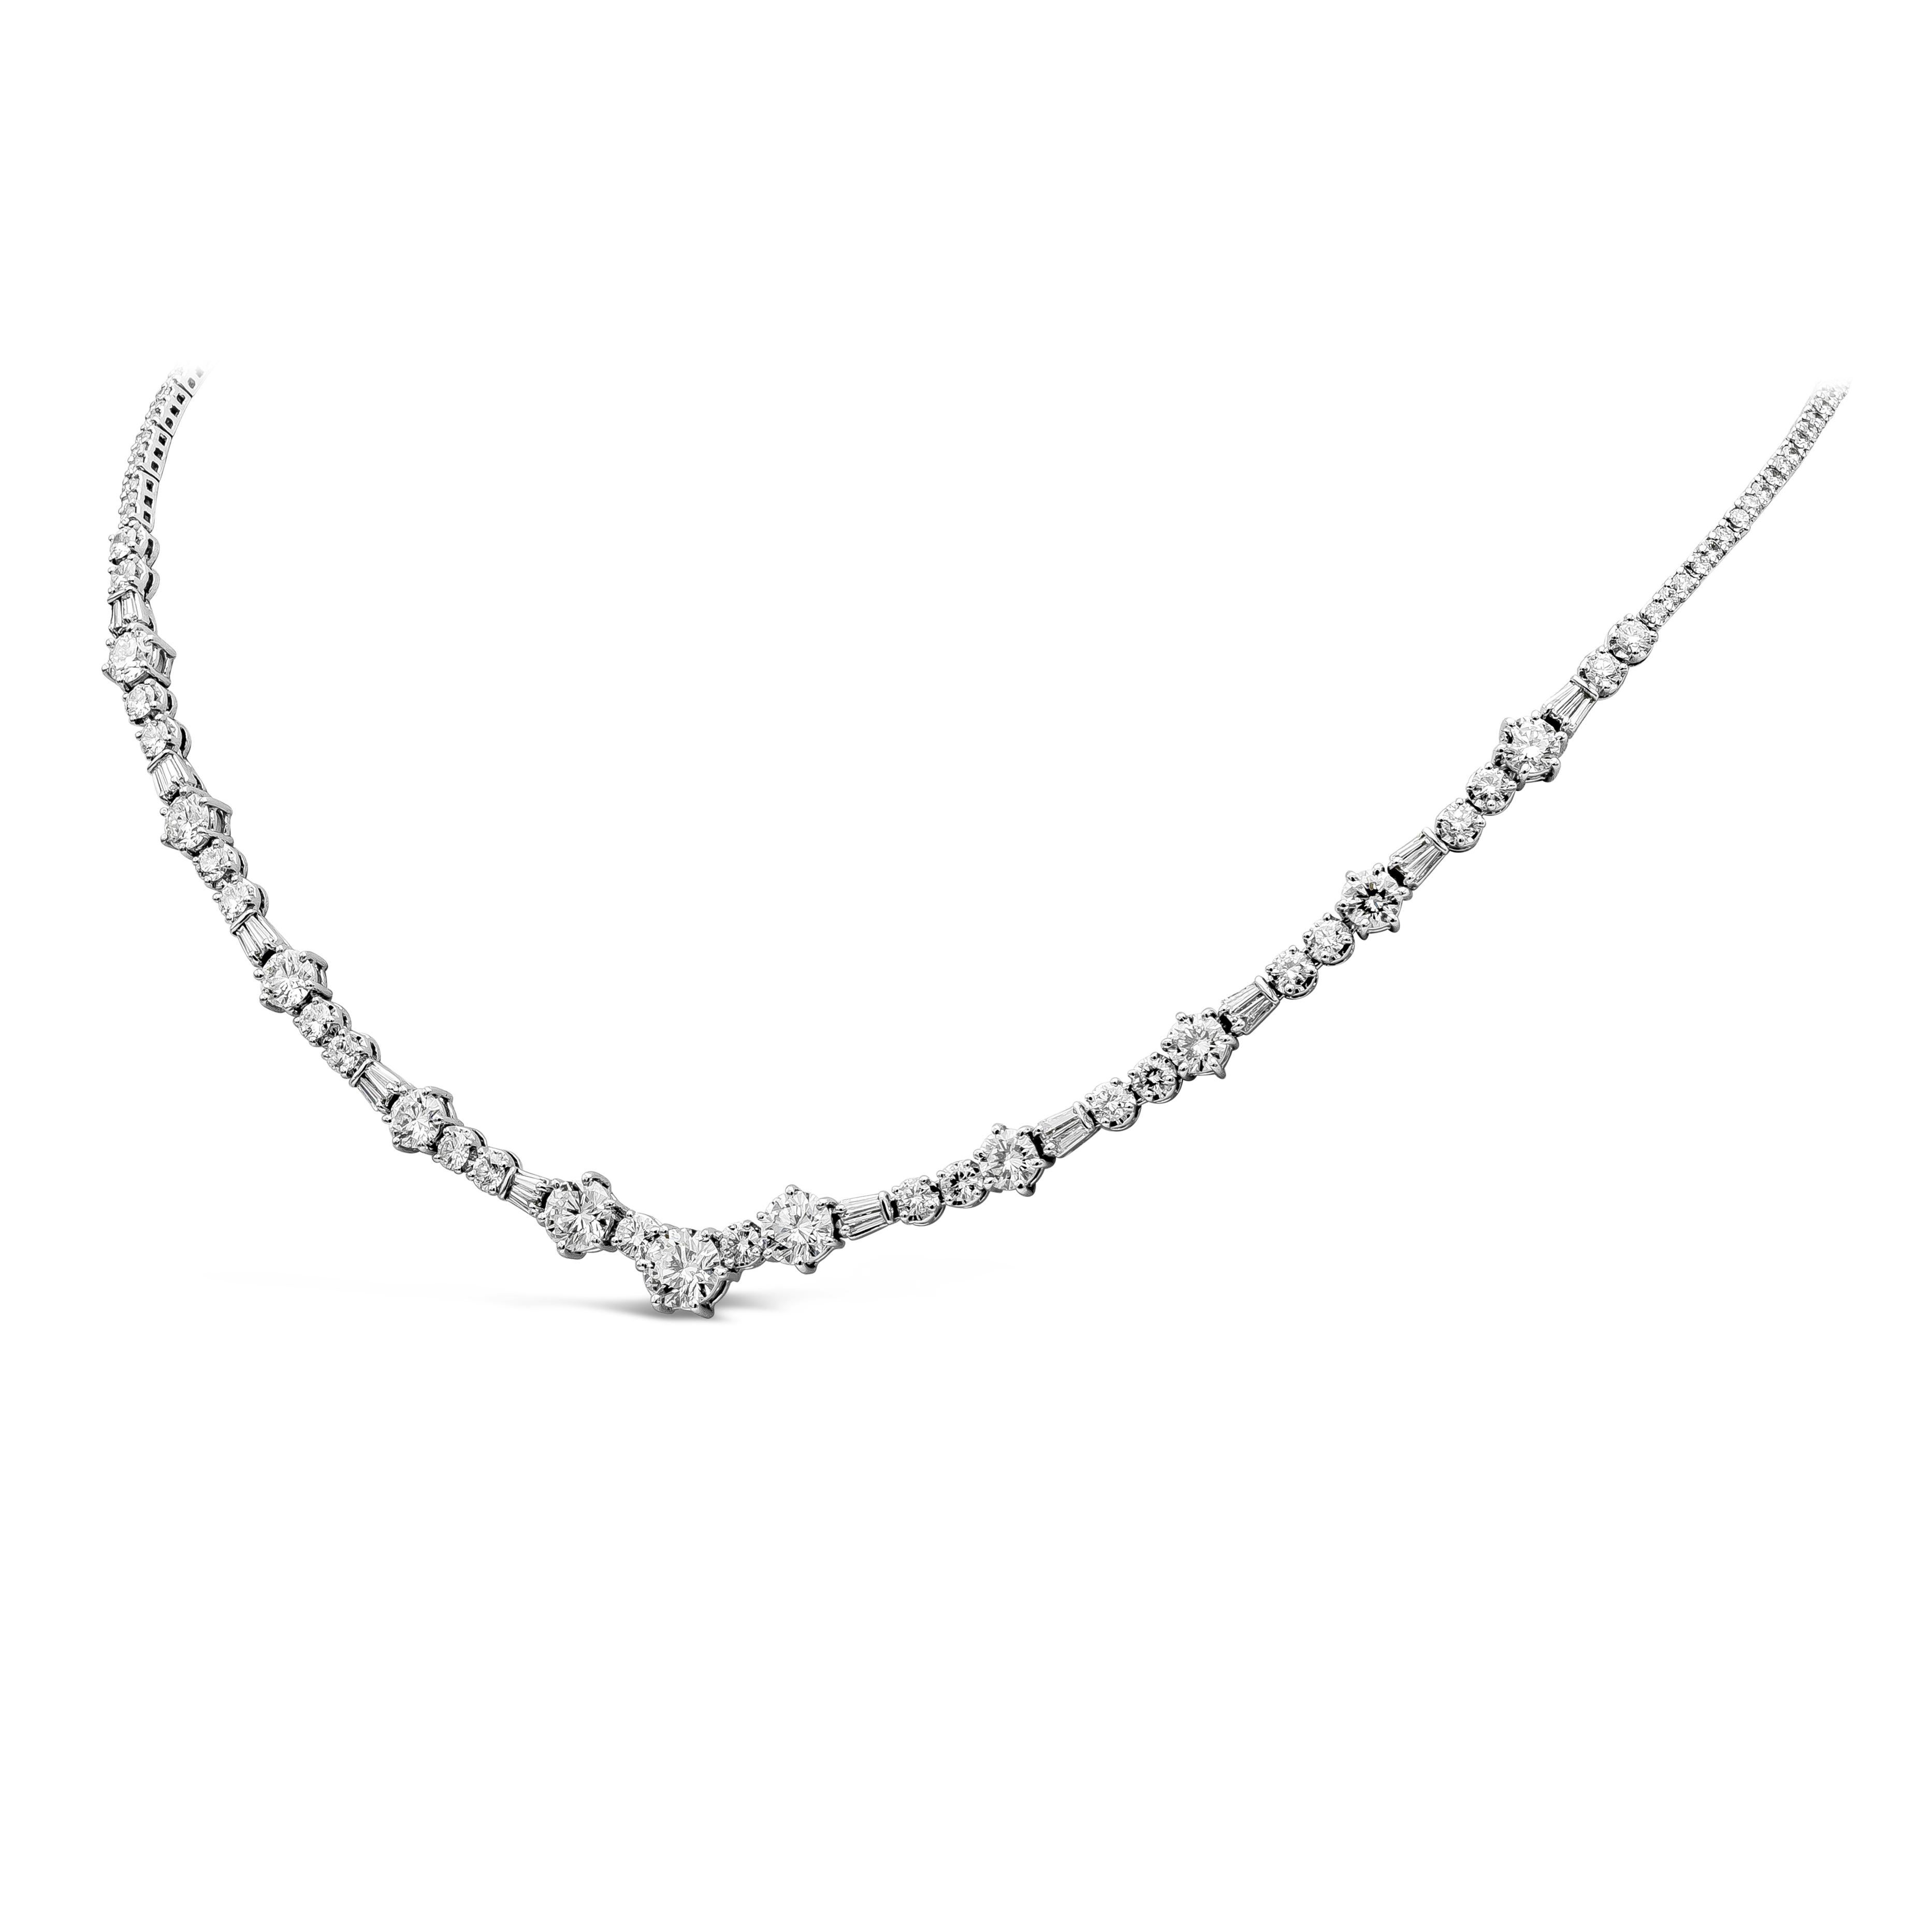 This sophisticated elegant tennis necklace showcases a row of 179 pieces of brilliant round diamonds weighing 7.21 carats, and 20 pieces of beautifully set baguette diamonds weighing approximately 1.50 carats. Set in 18k White Gold. 

Roman Malakov